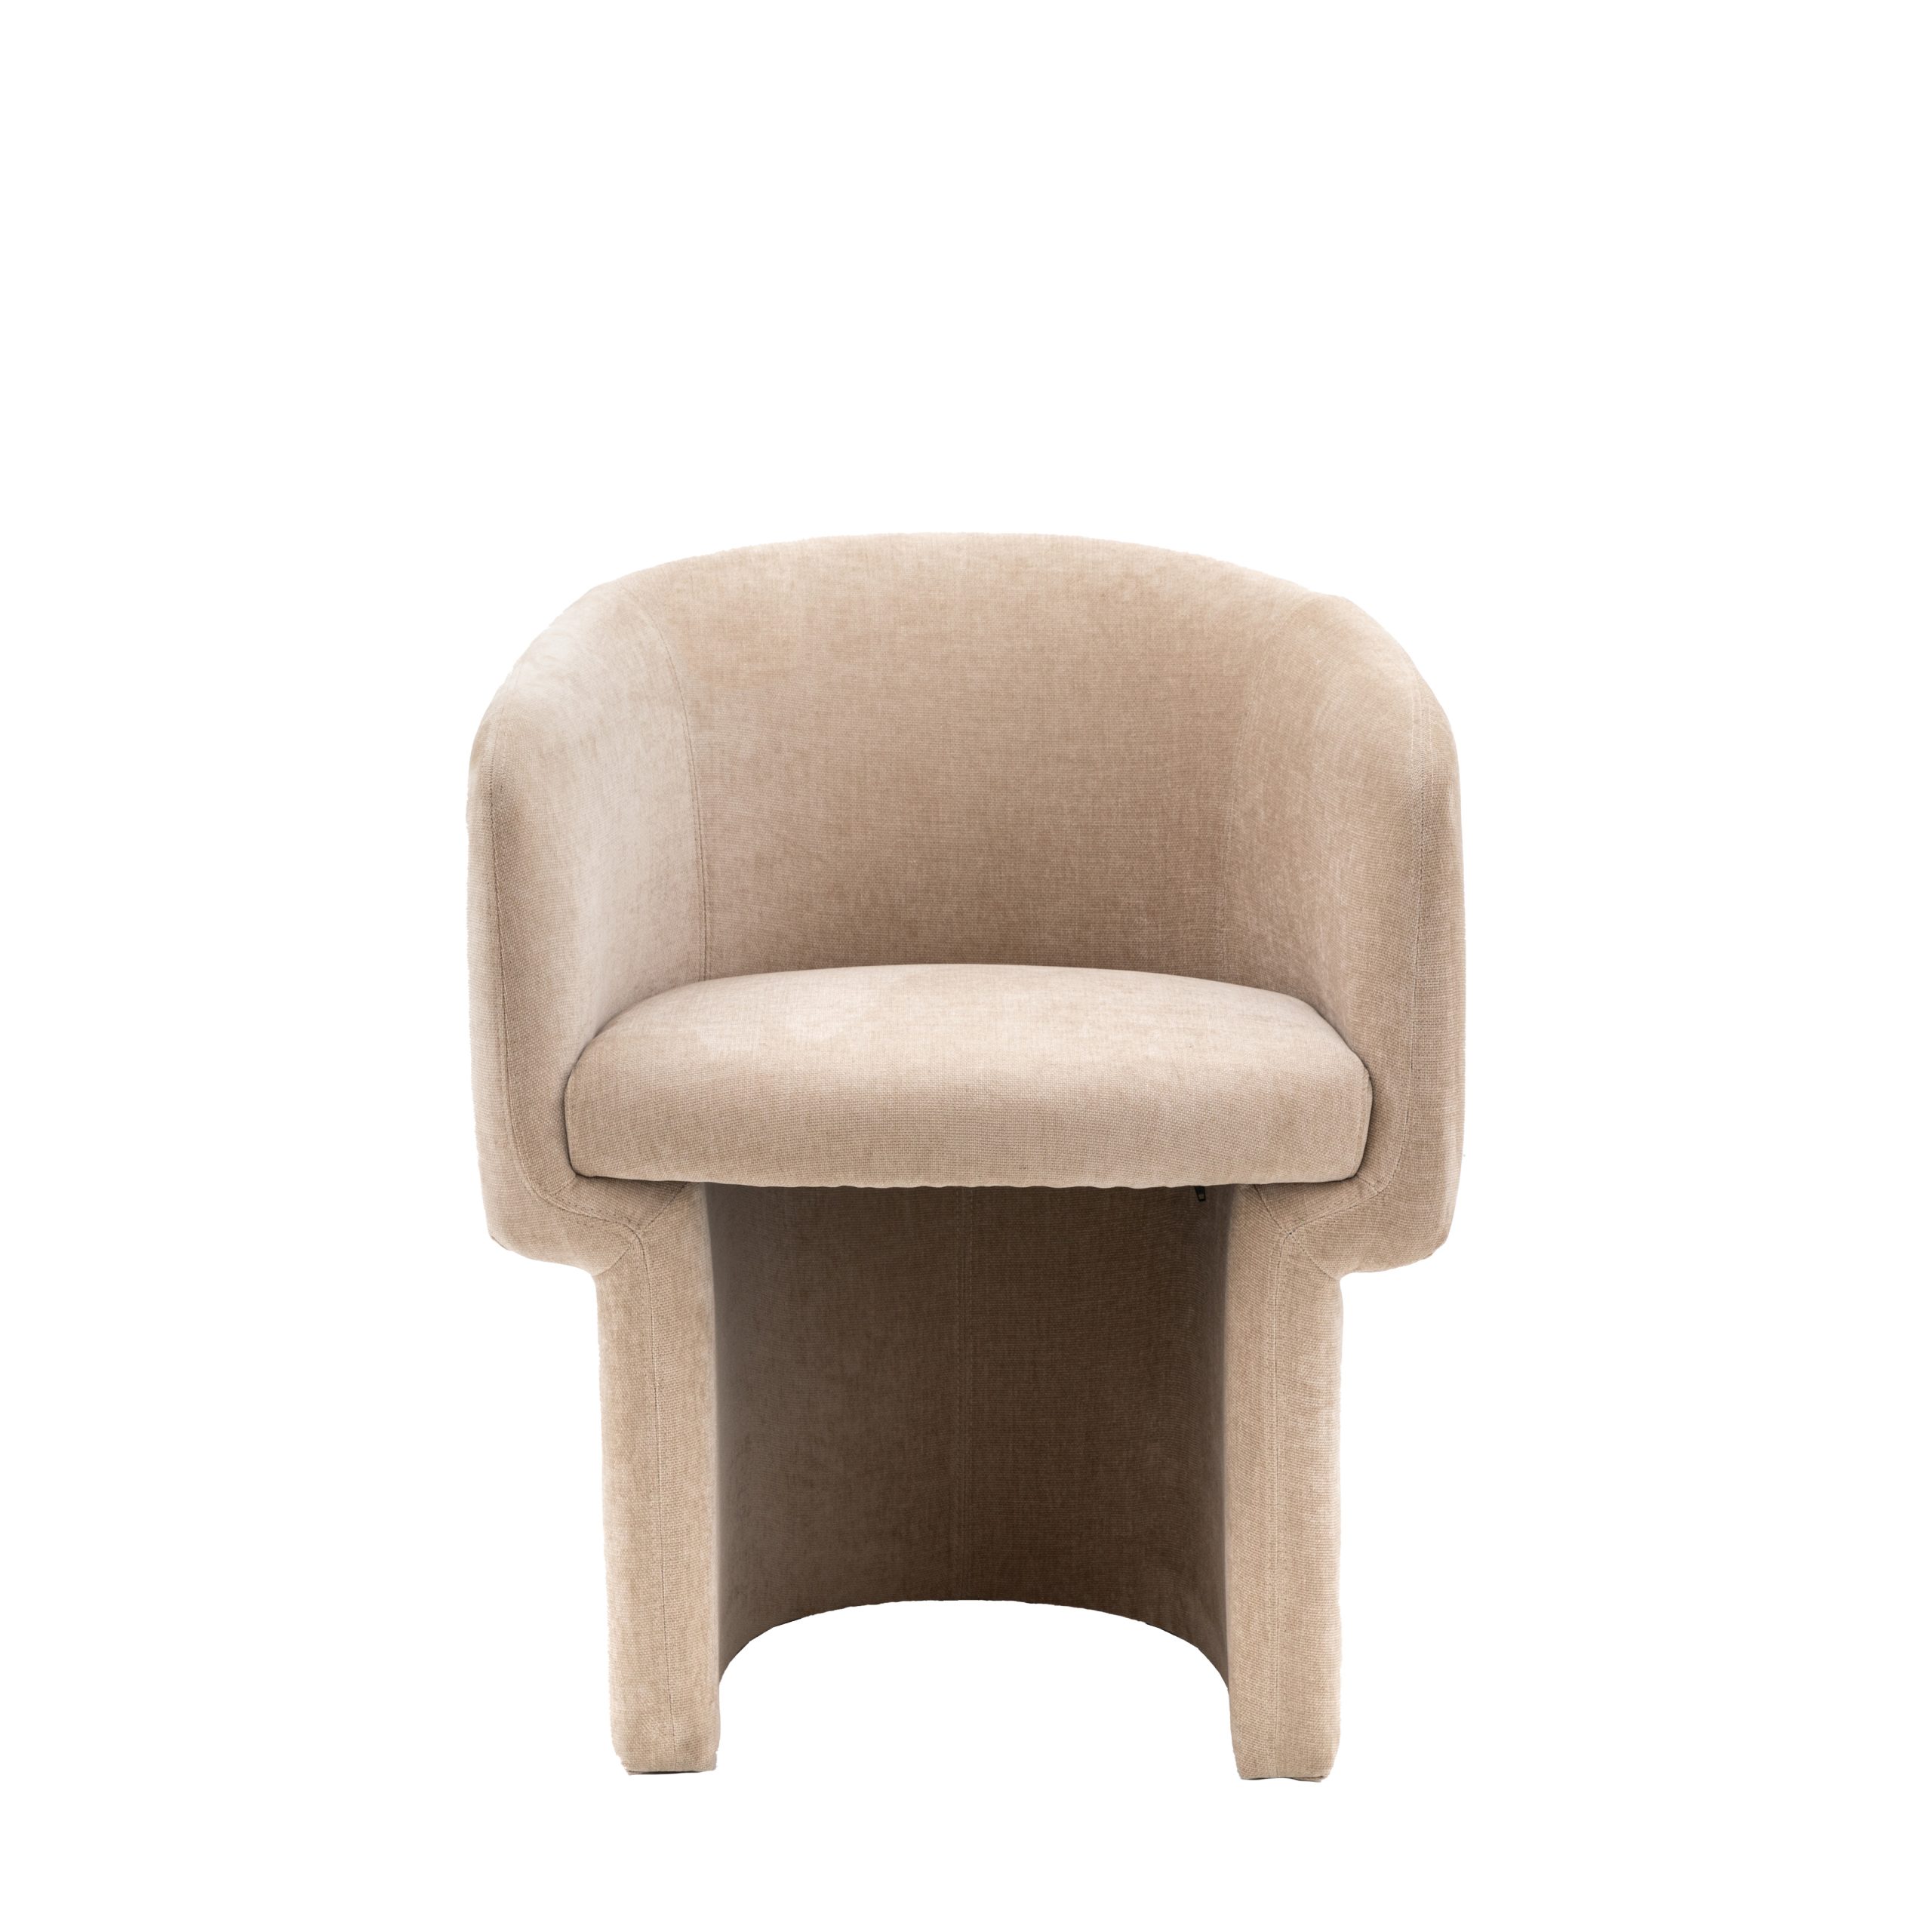 Gallery Direct Holm Dining Chair Cream